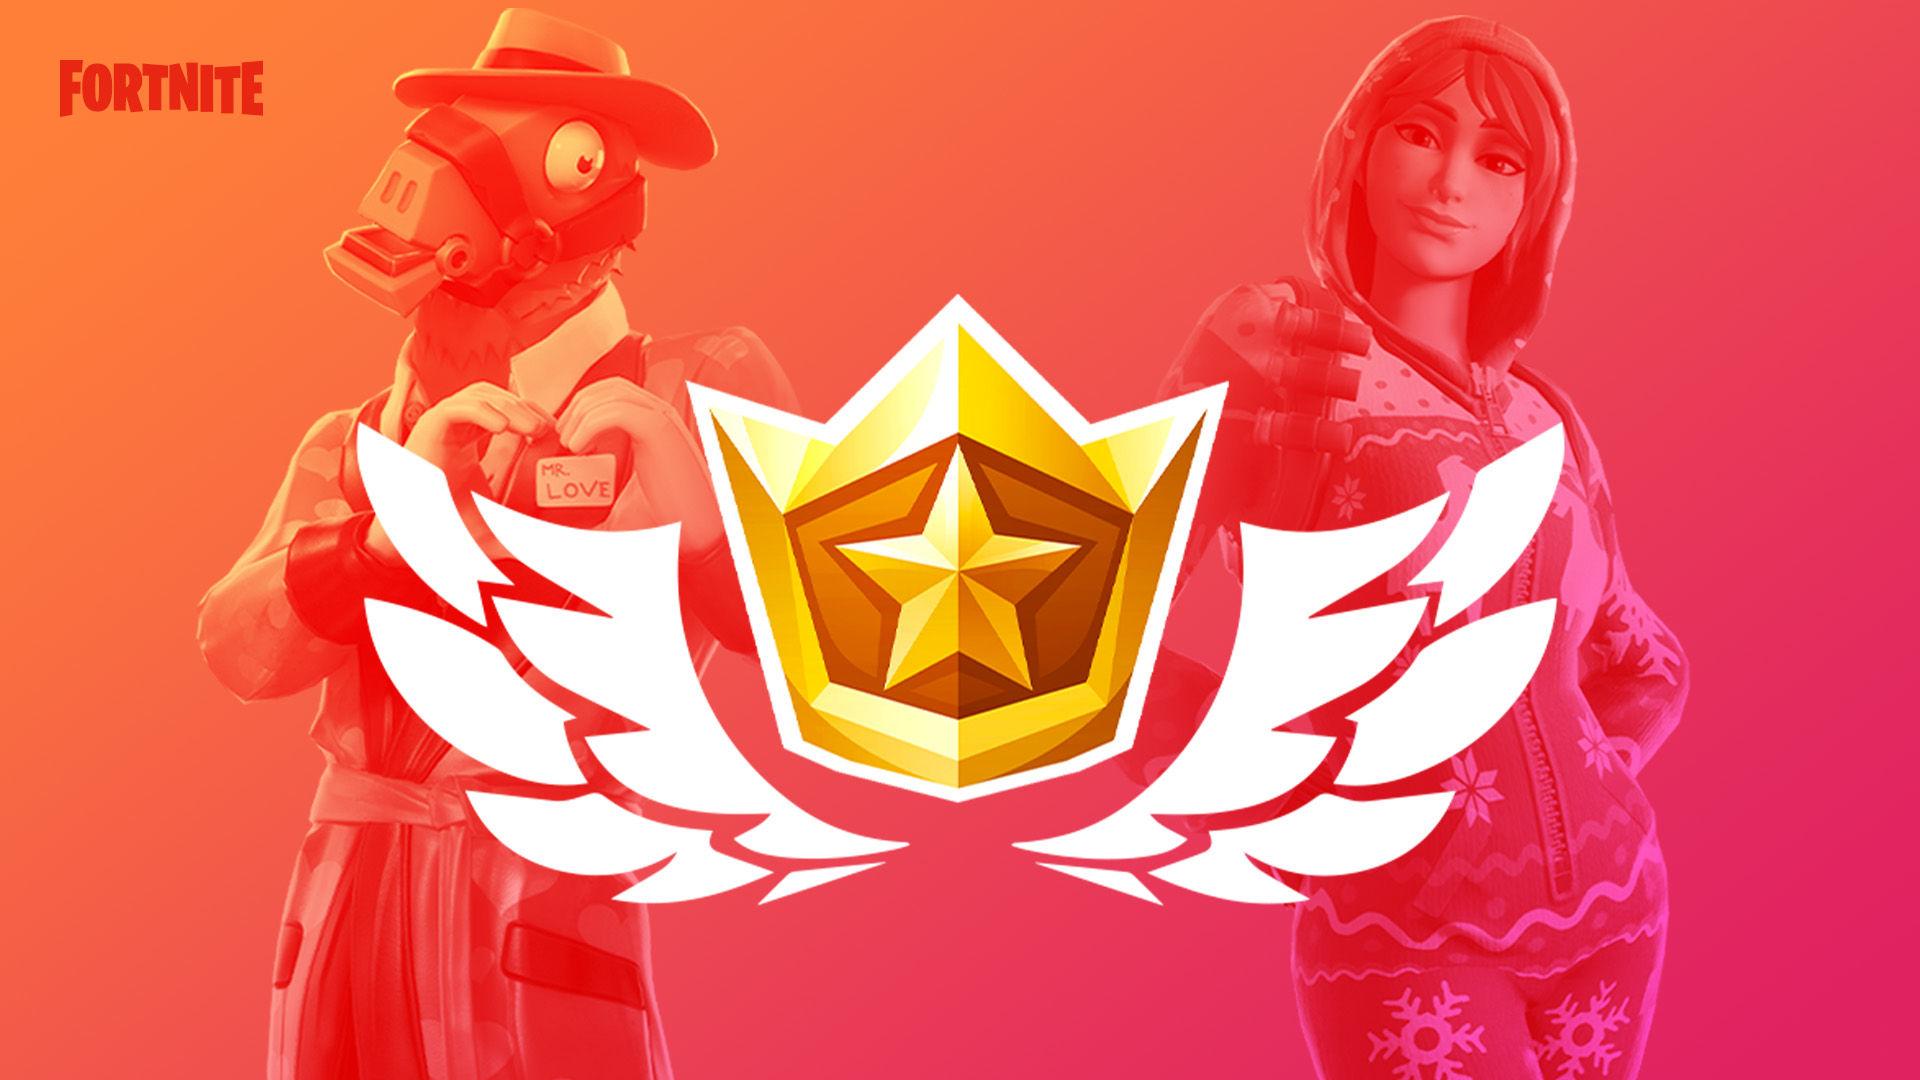 Fortnite' players can get the next Battle Pass for free